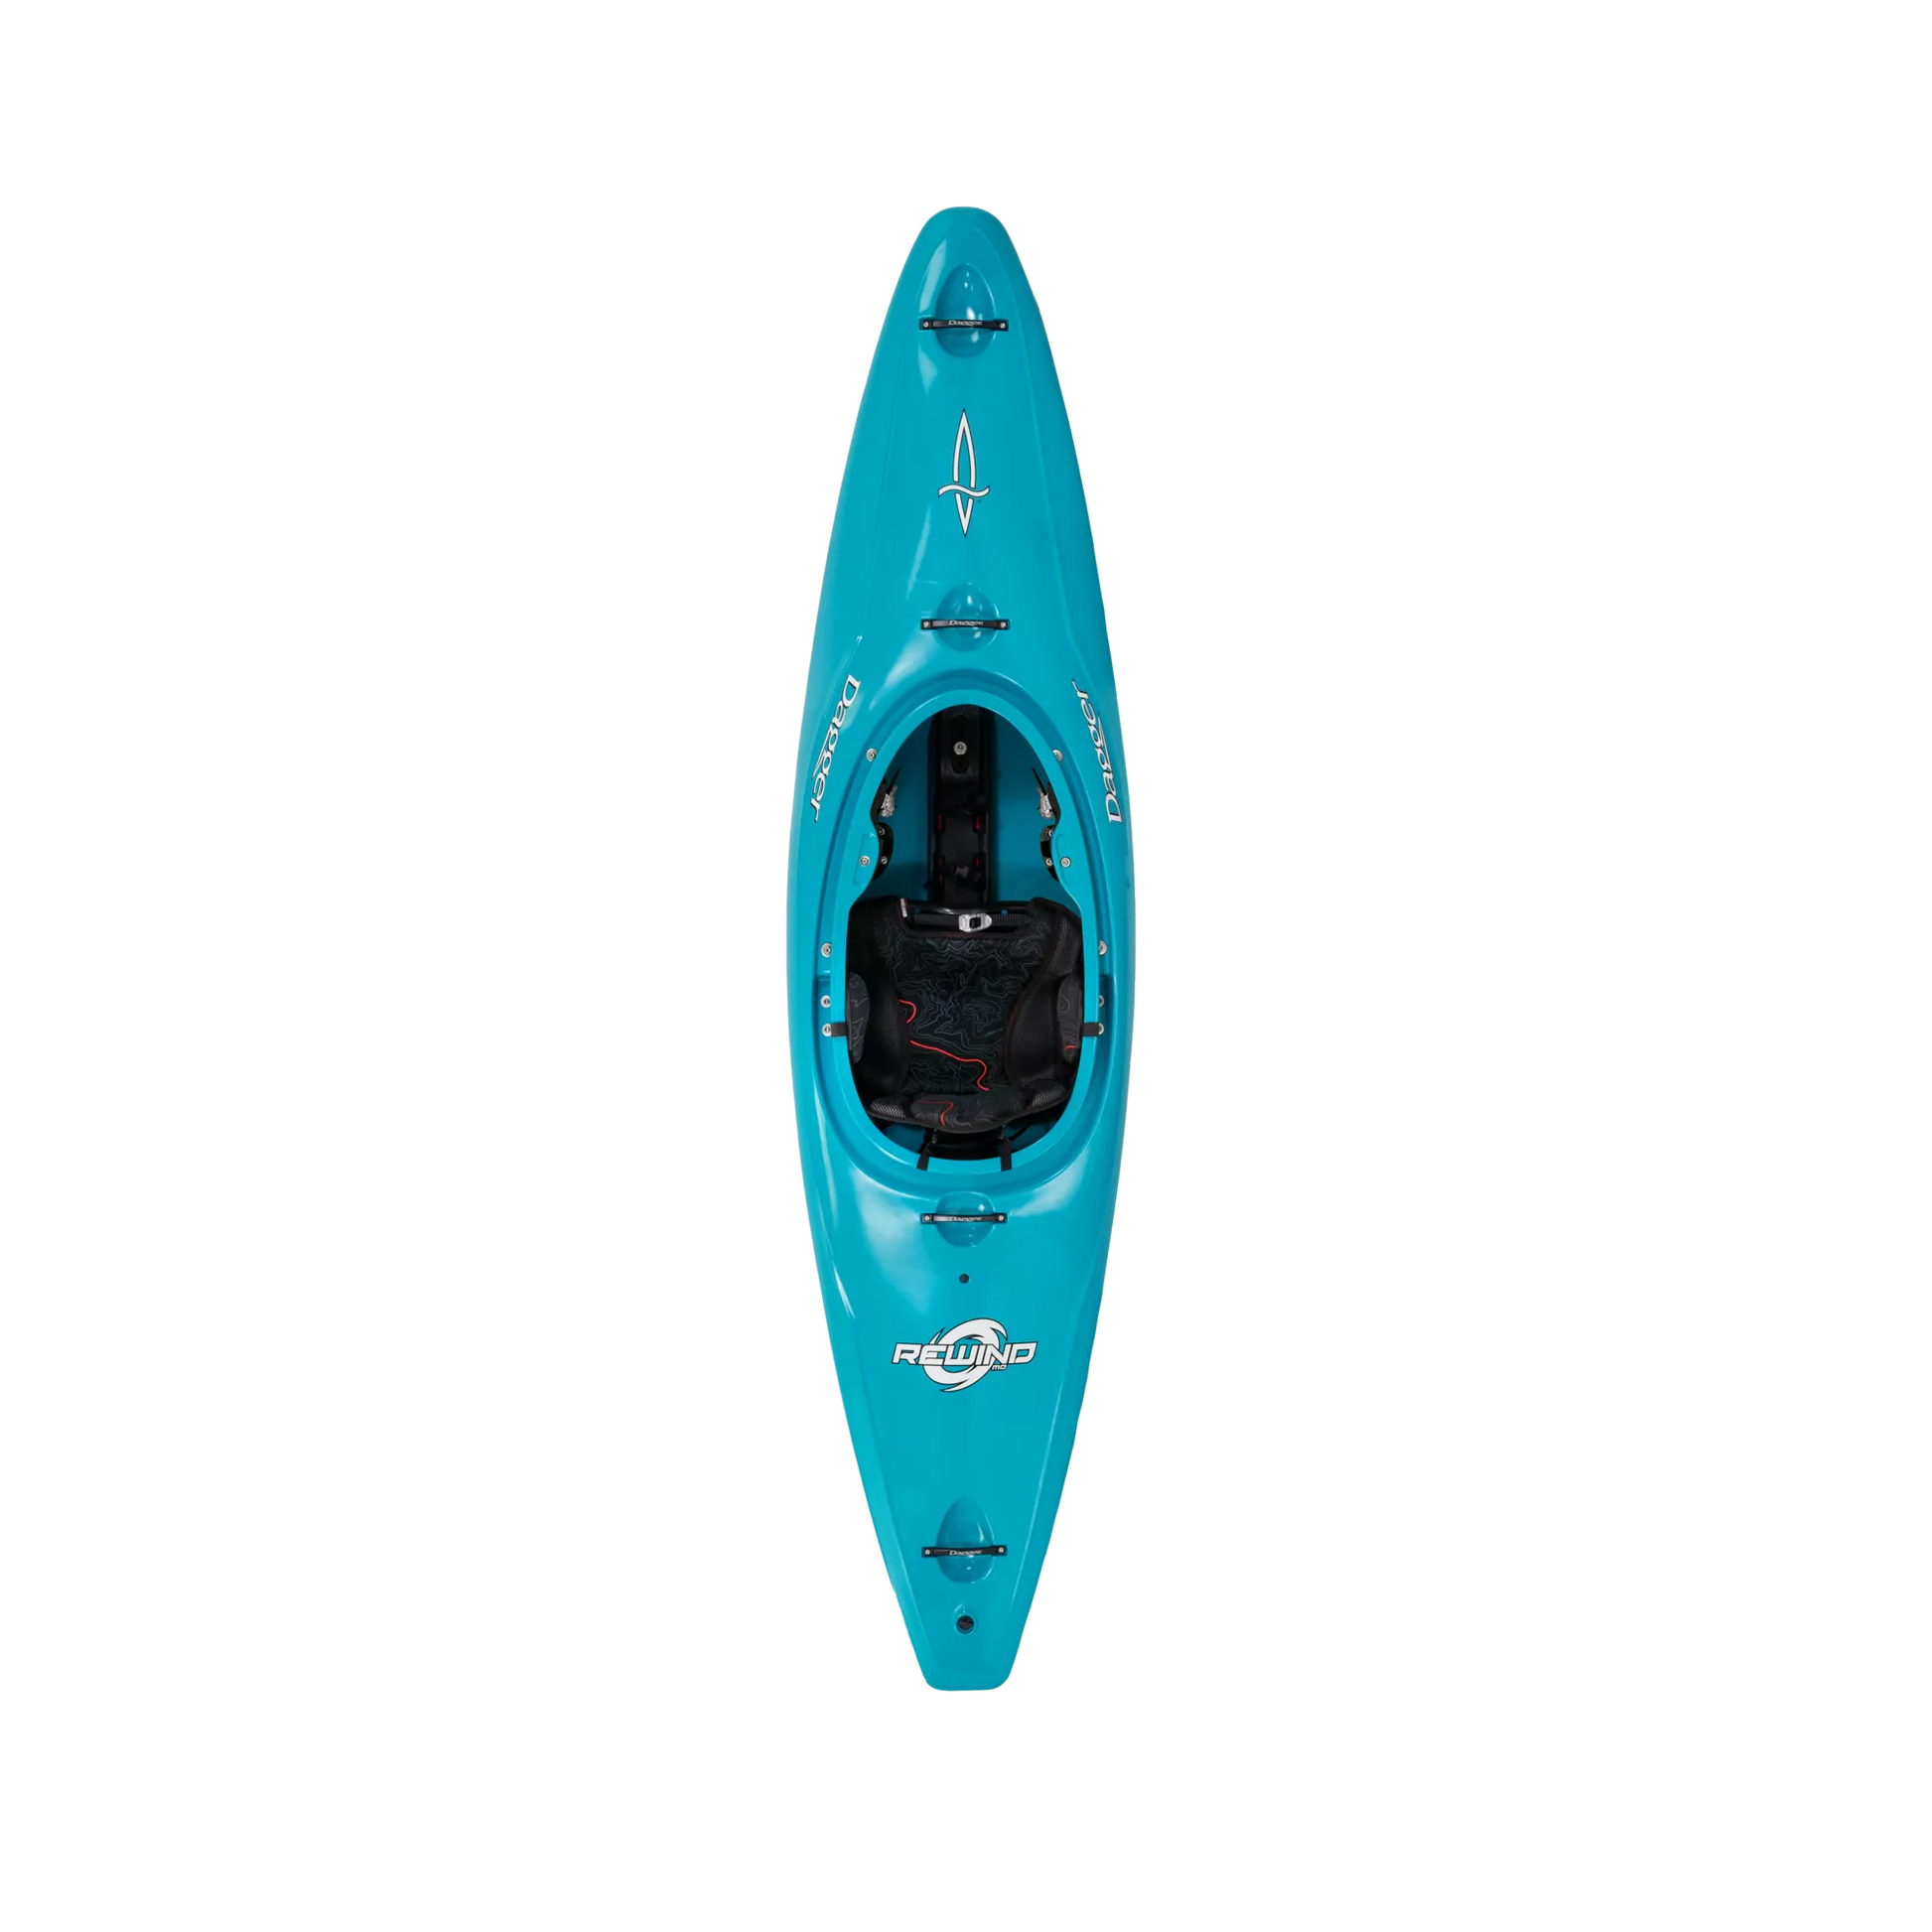 Turquoise Dagger Rewind whitewater river play kayak with new thigh brace system.